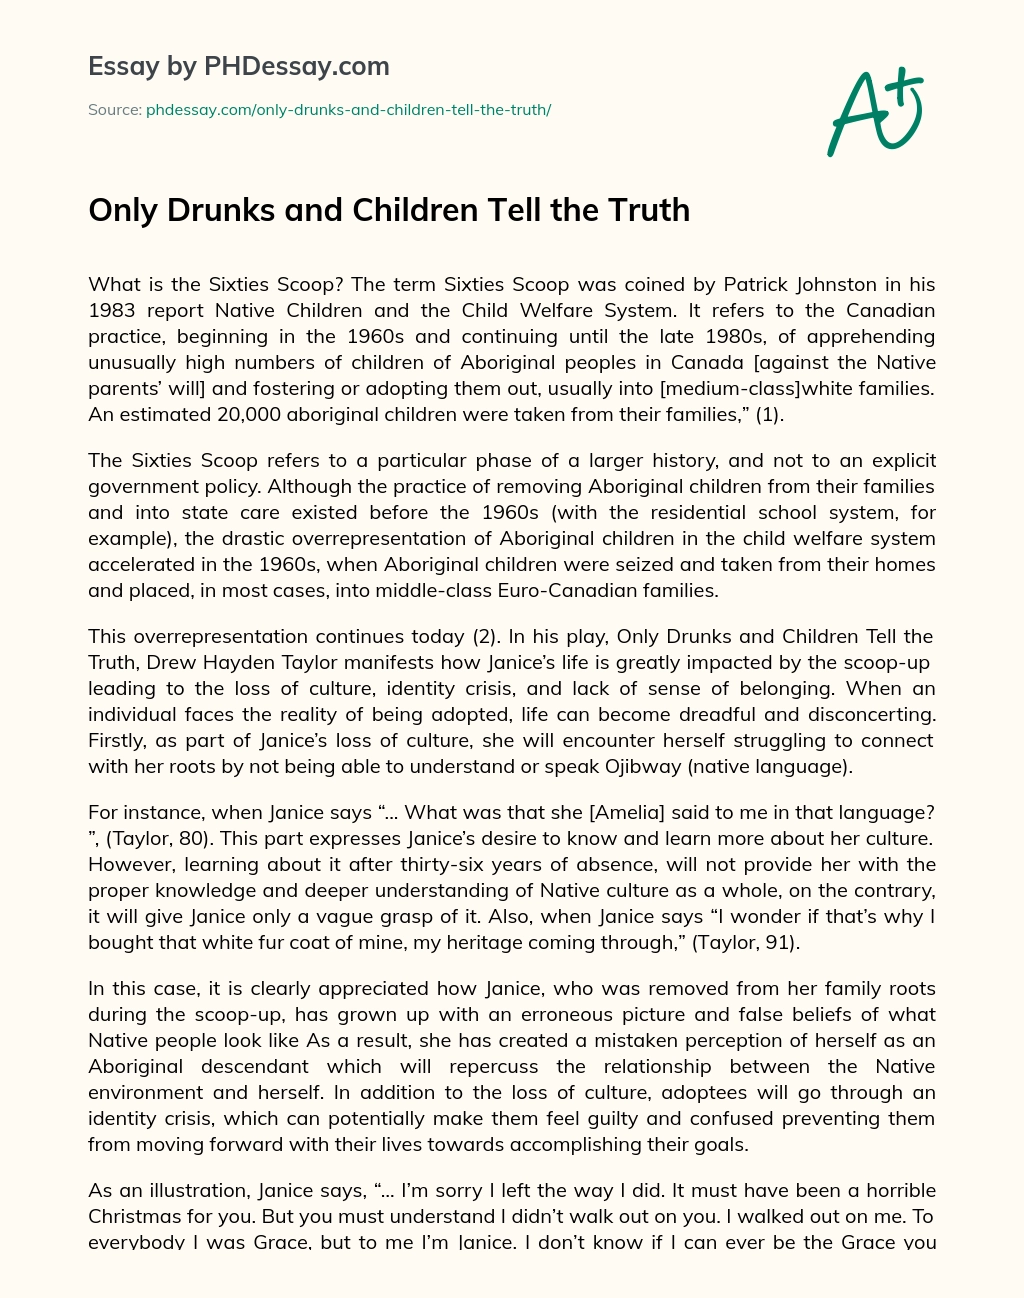 Only Drunks and Children Tell the Truth essay